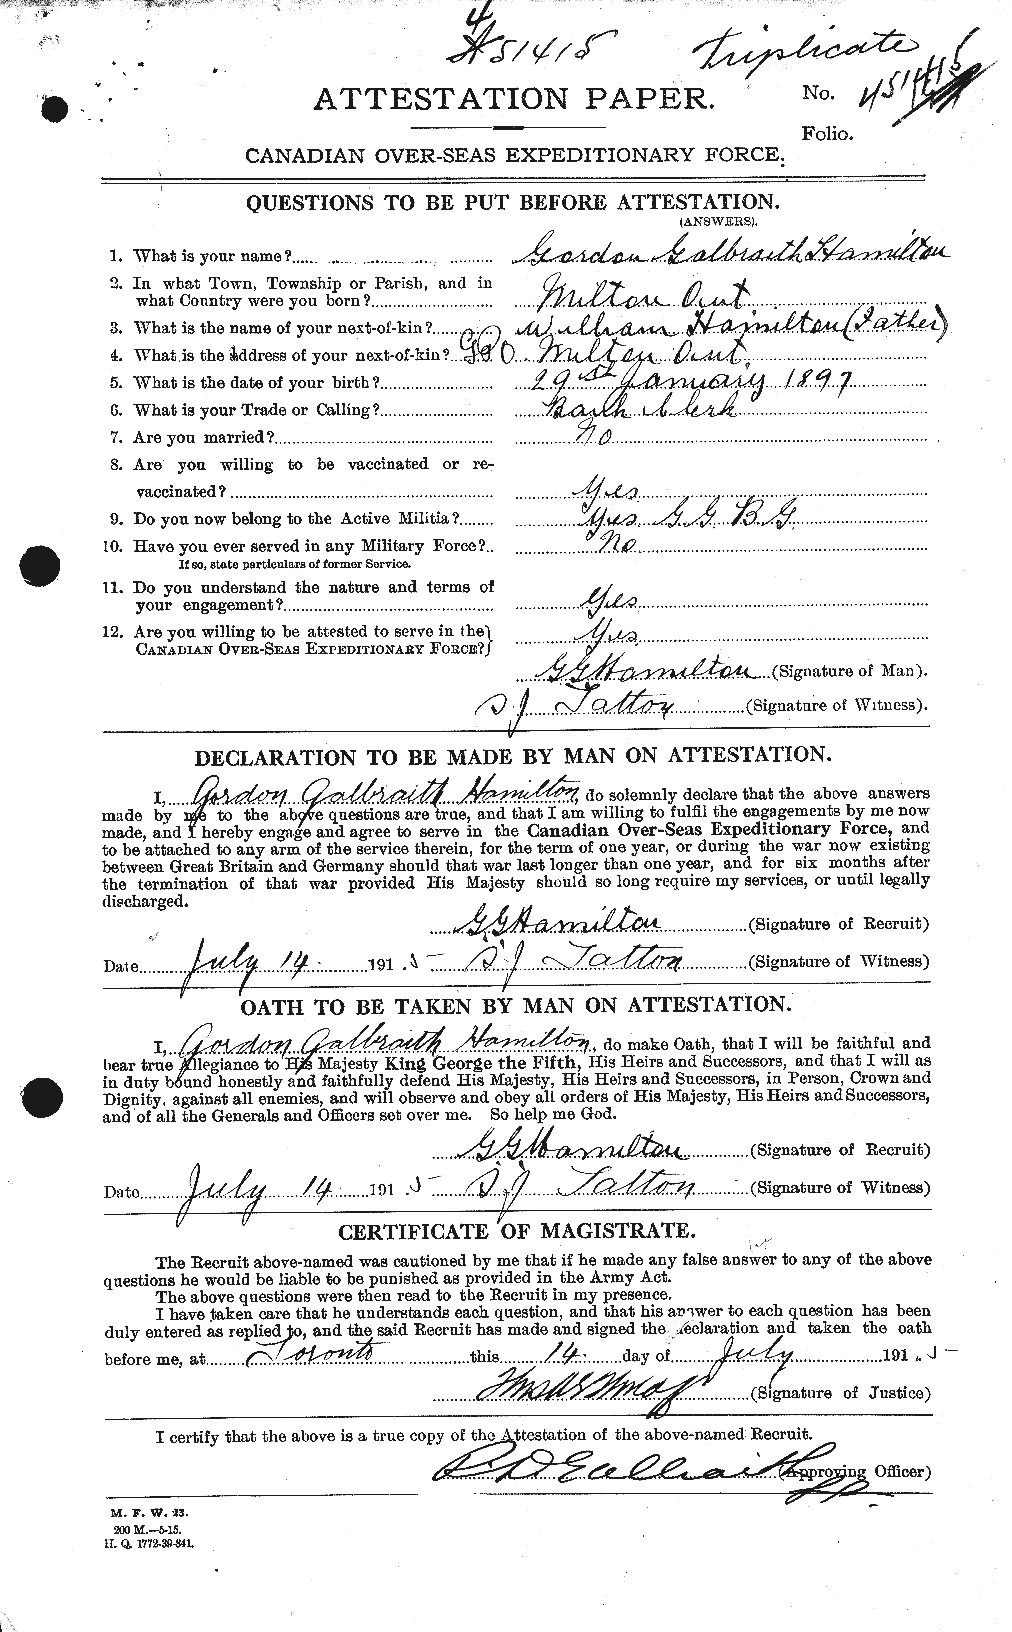 Personnel Records of the First World War - CEF 372483a